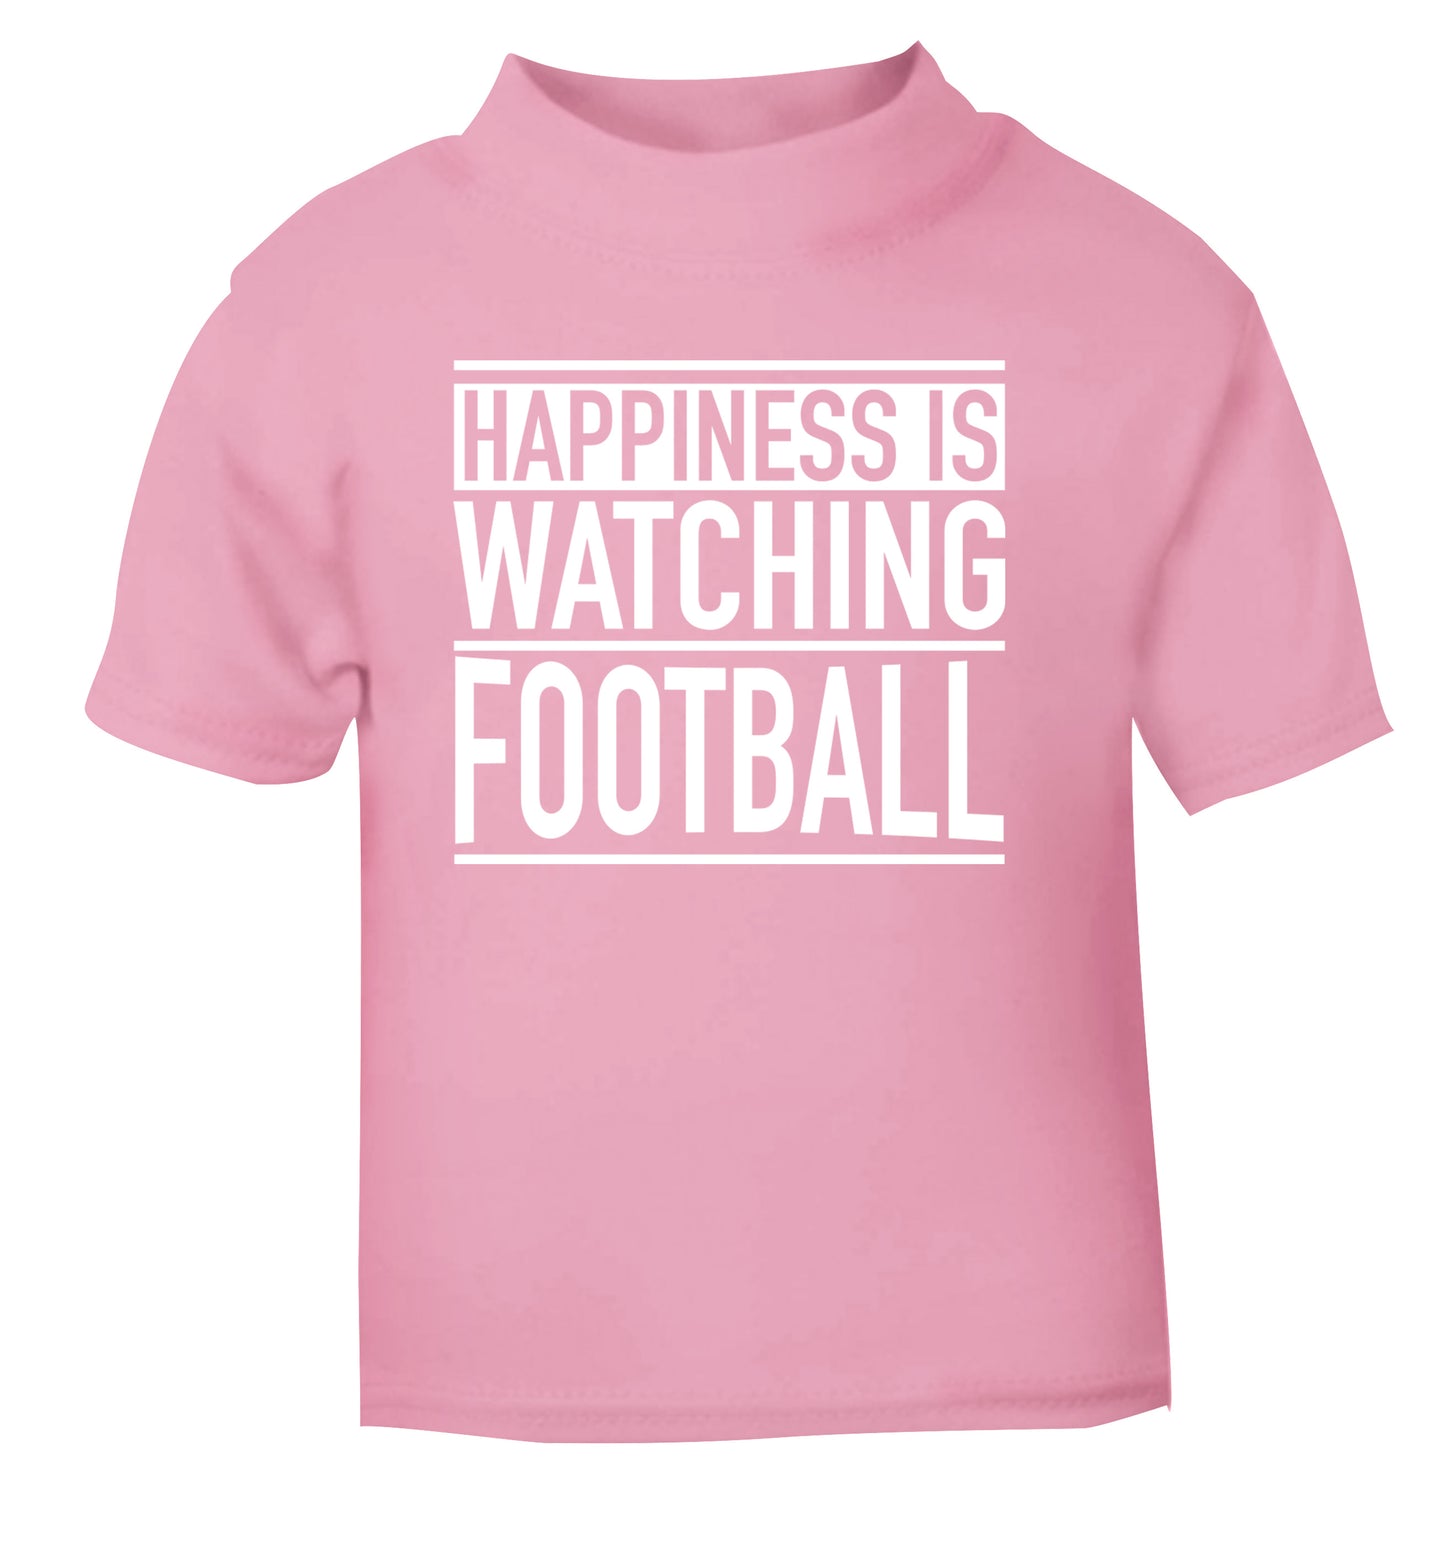 Happiness is watching football light pink Baby Toddler Tshirt 2 Years